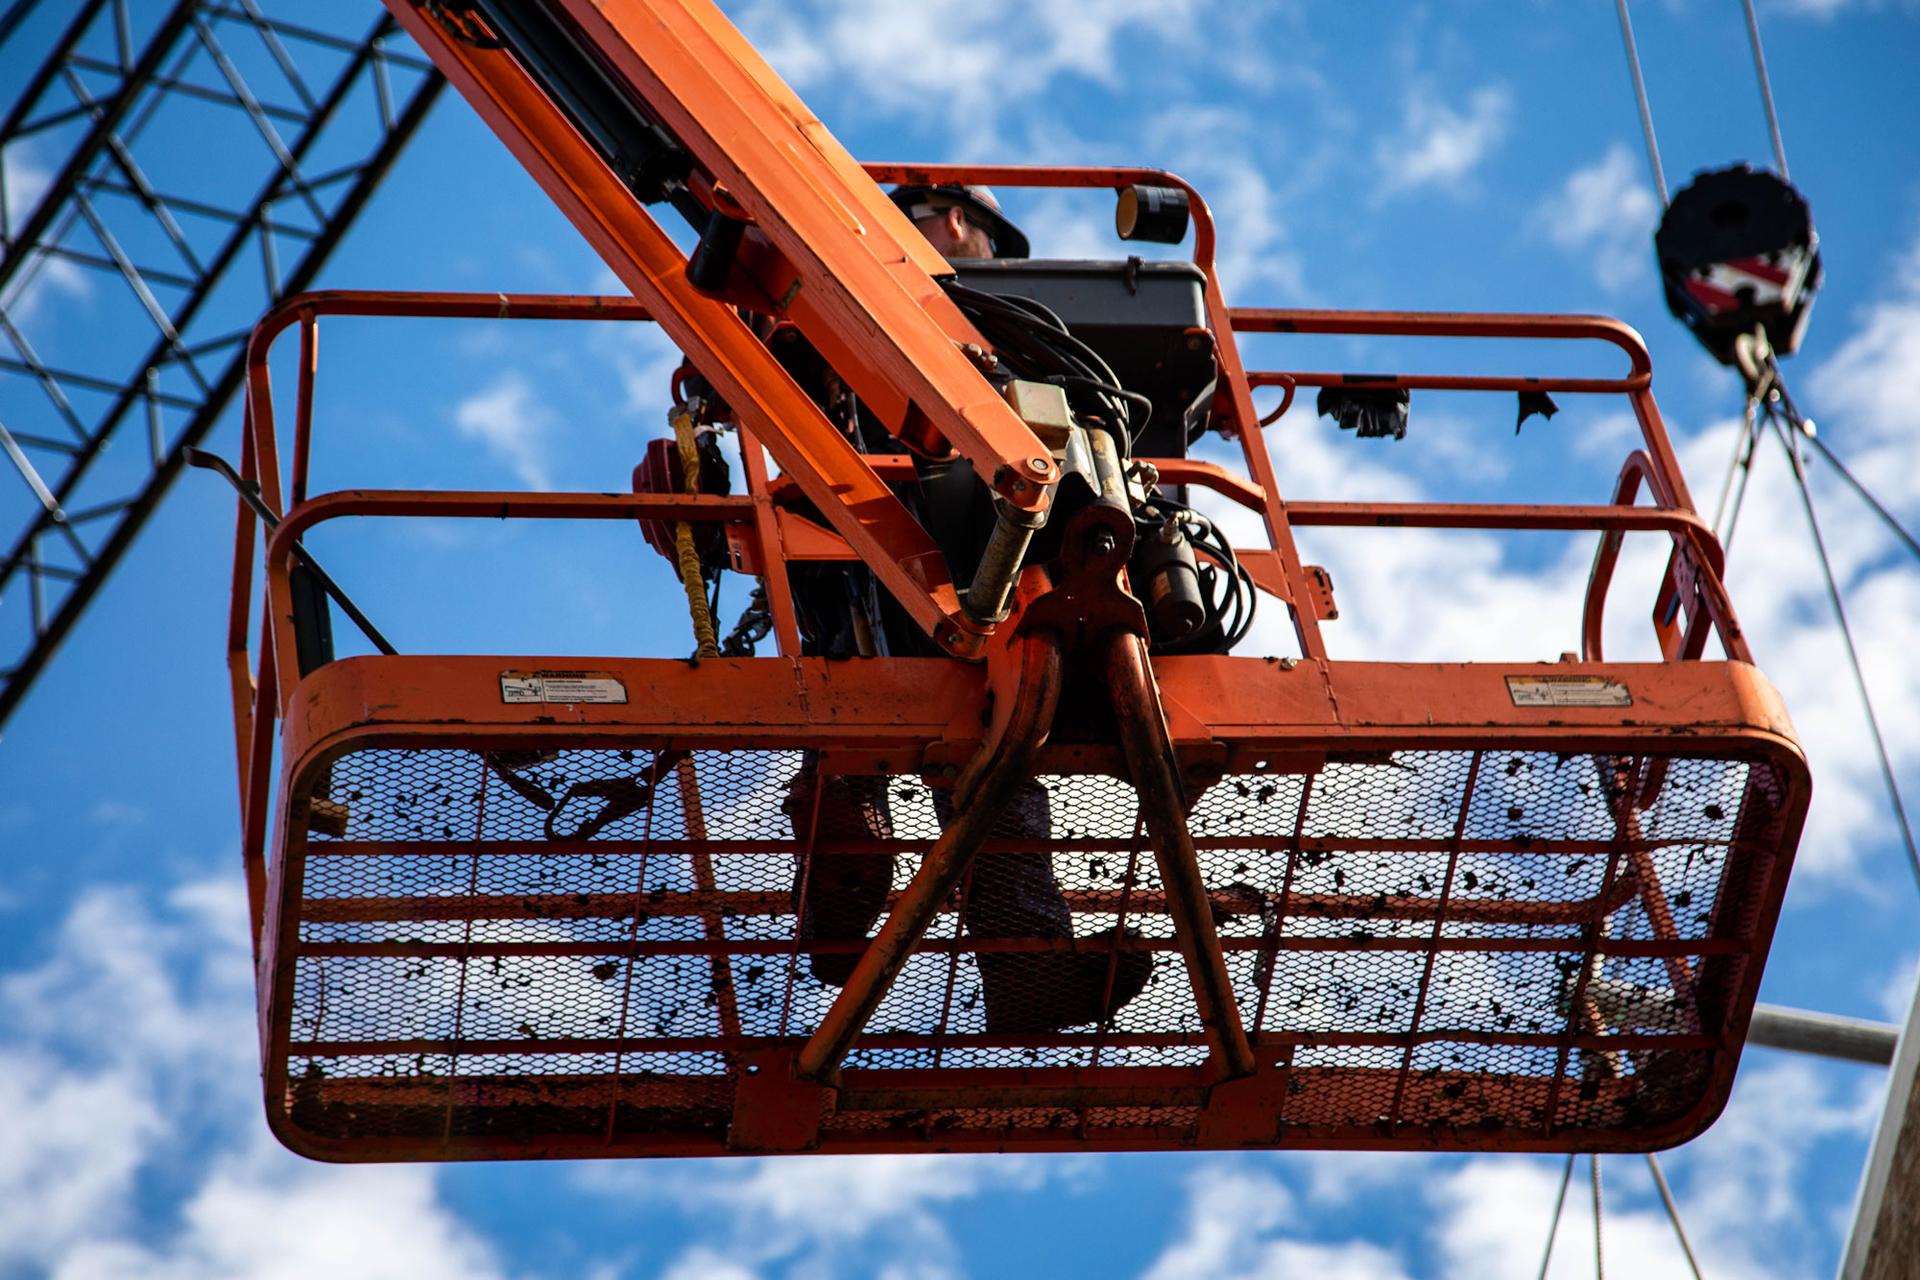 A worker is shown from below standing on an orange platform of a hydraulic crane.